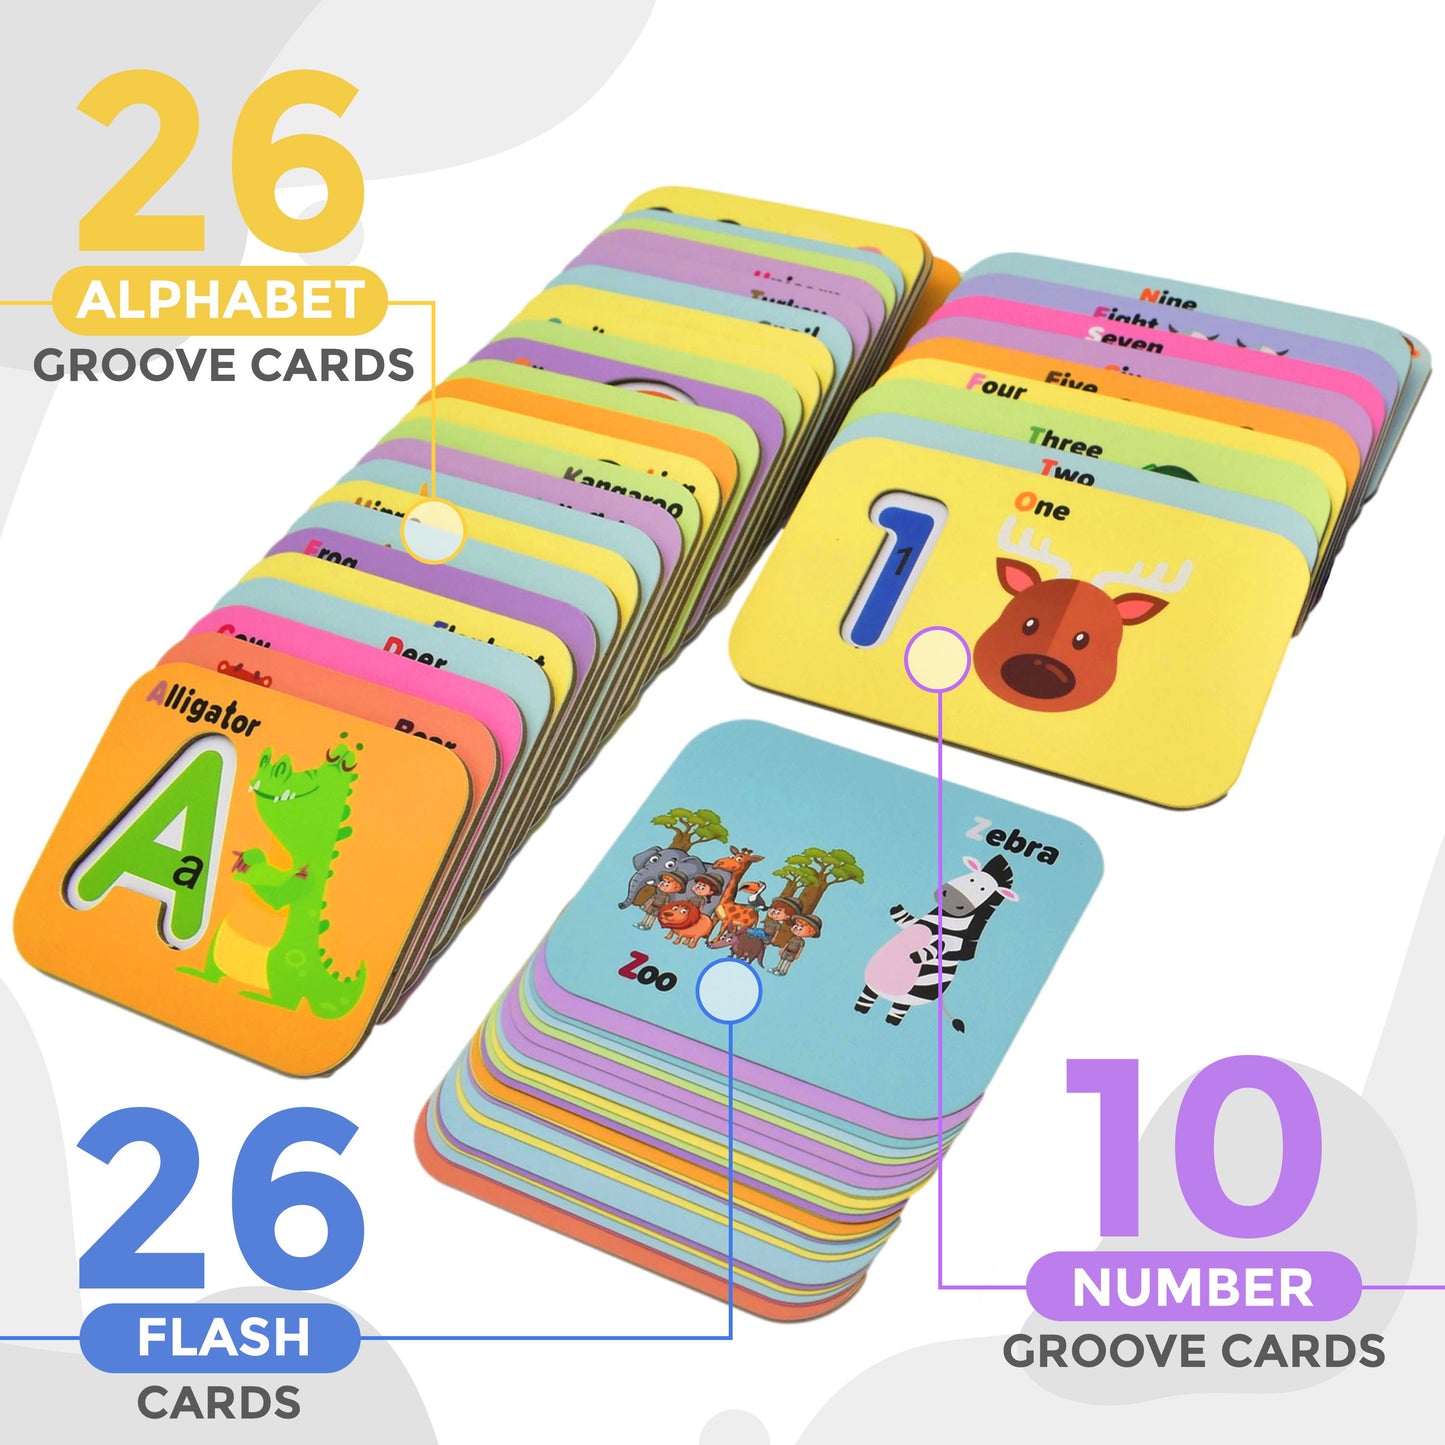 KOKO AROMA Alphabet Flash Cards - Preschool Activities Learning Montessori Toys ABC Wooden Letters Jigsaw Numbers Alphabets Puzzles Flashcards for Age 2 3 4 Years Old (FC-WoodAlpha)